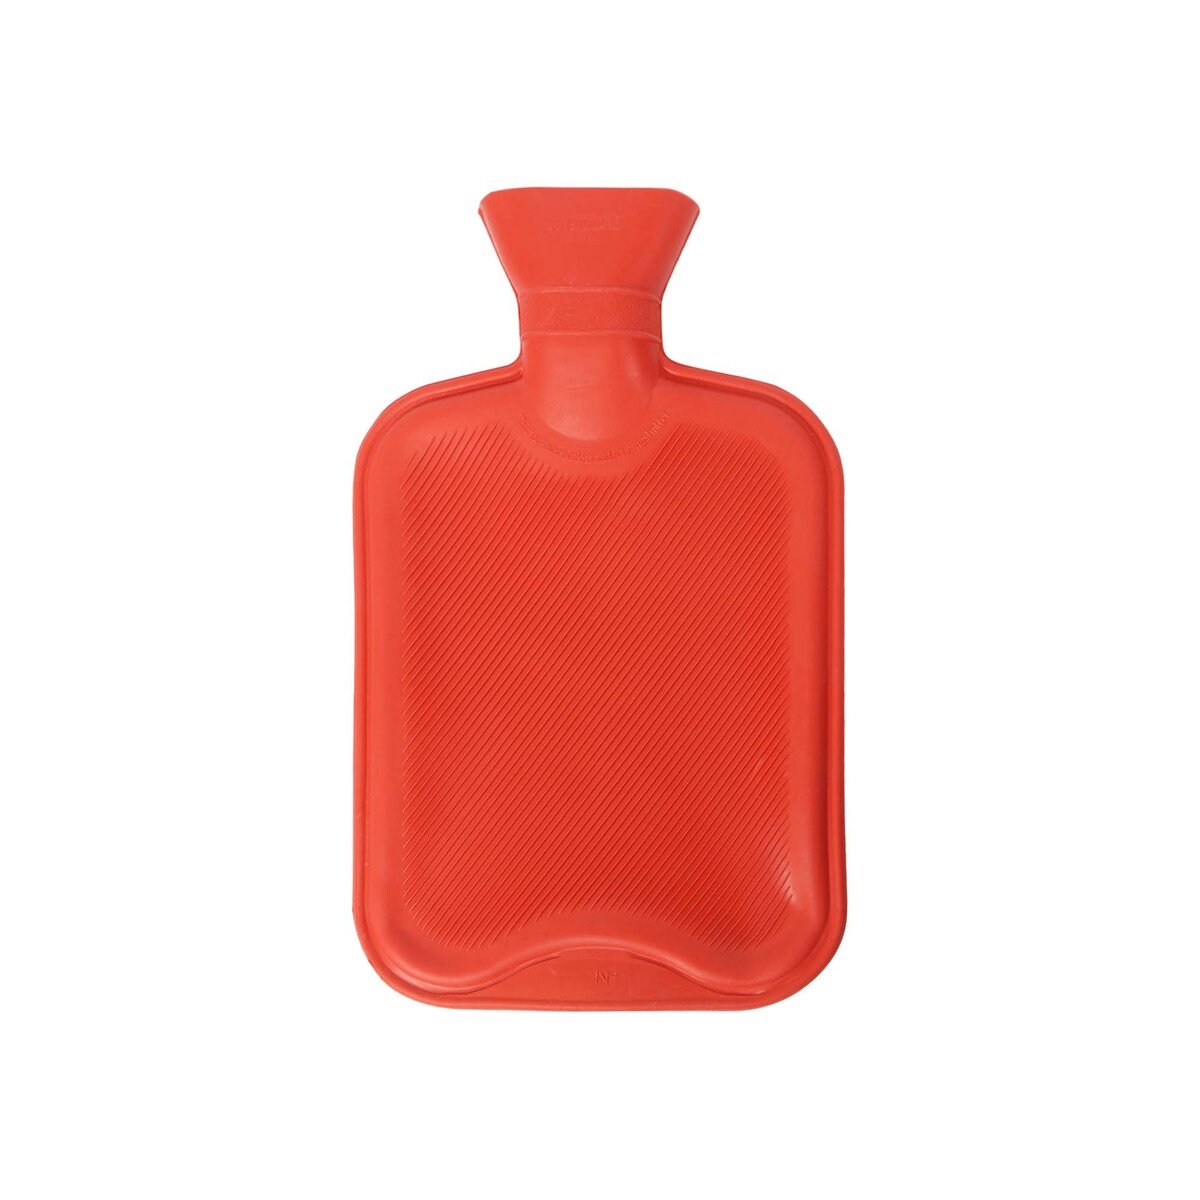 Home Hot Water Bag HK-105 Assorted Colors